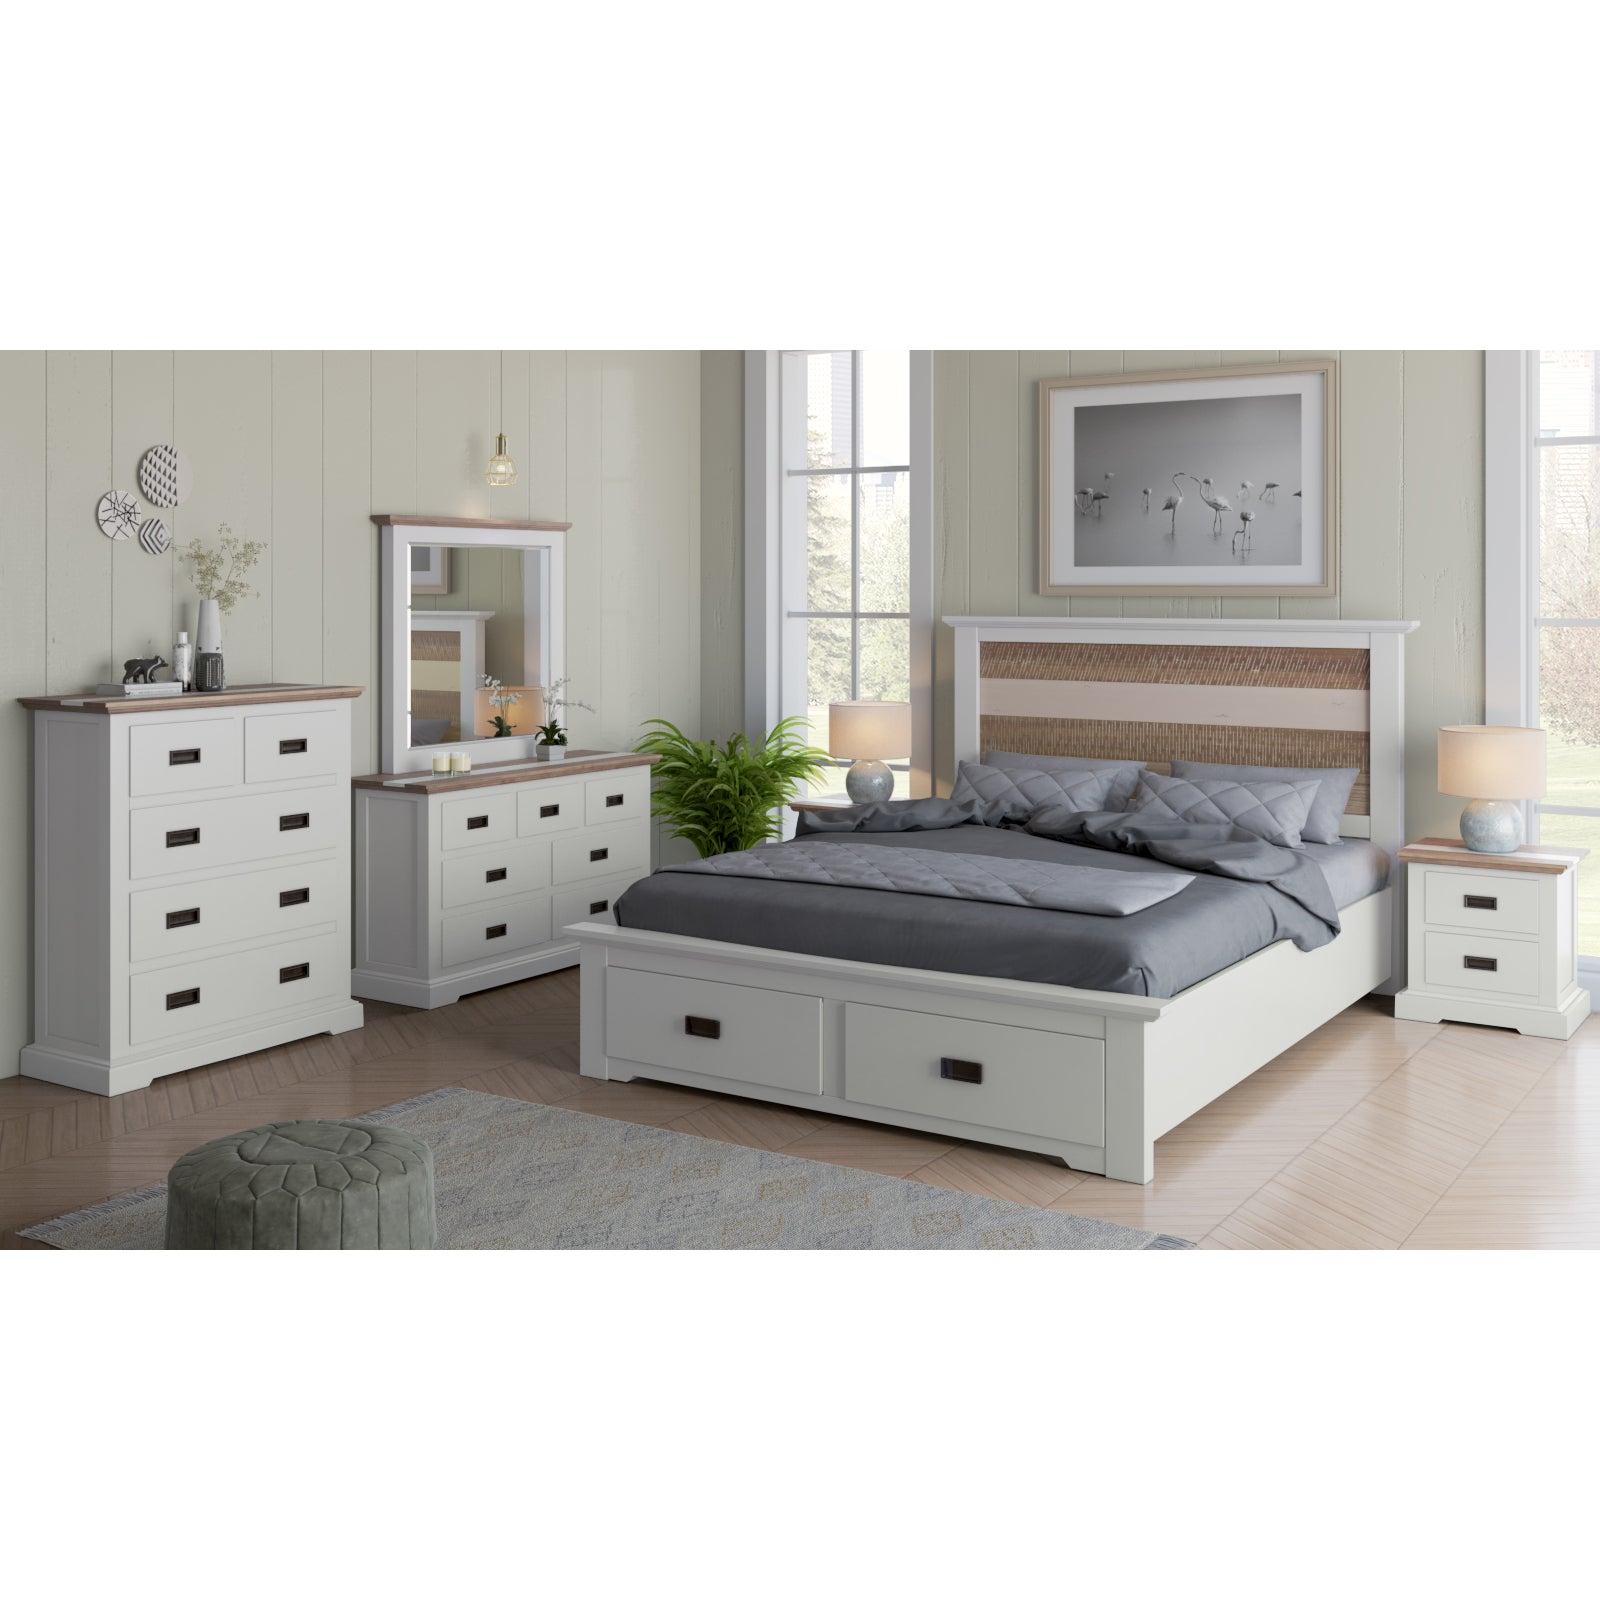 Multifunctional Queen Size Mattress Base with Colorful Storage Drawers